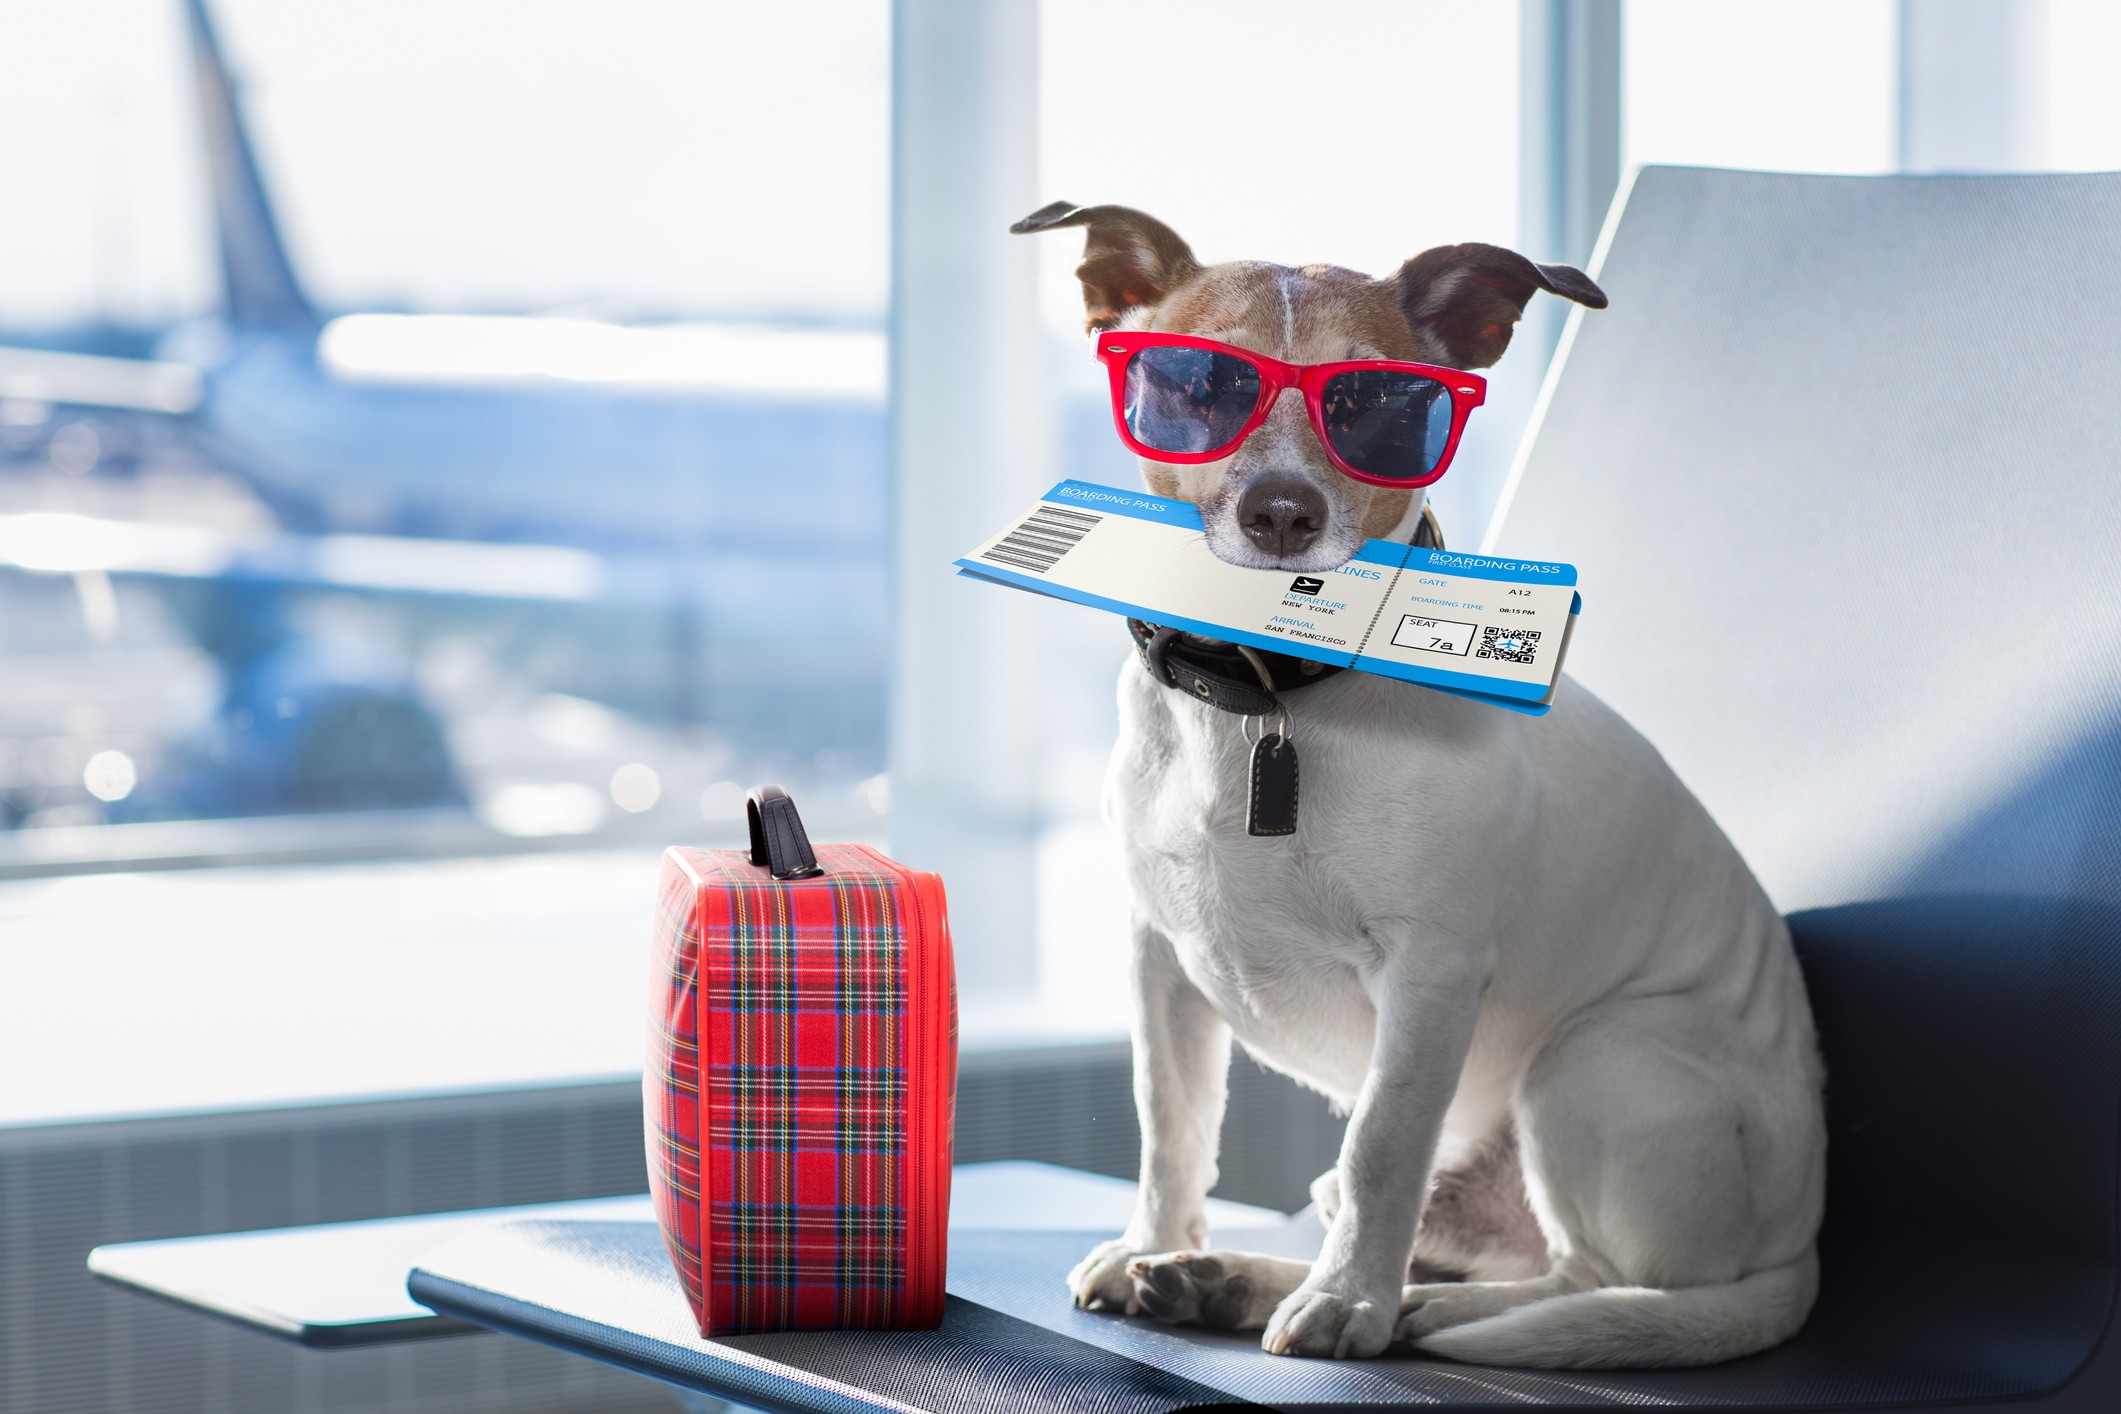 Many airports now cater to your four-legged friends, and four airports have gone the extra mile to build lounges where almost every creature on Earth can be housed, bathed and pampered. Photo: Getty Images